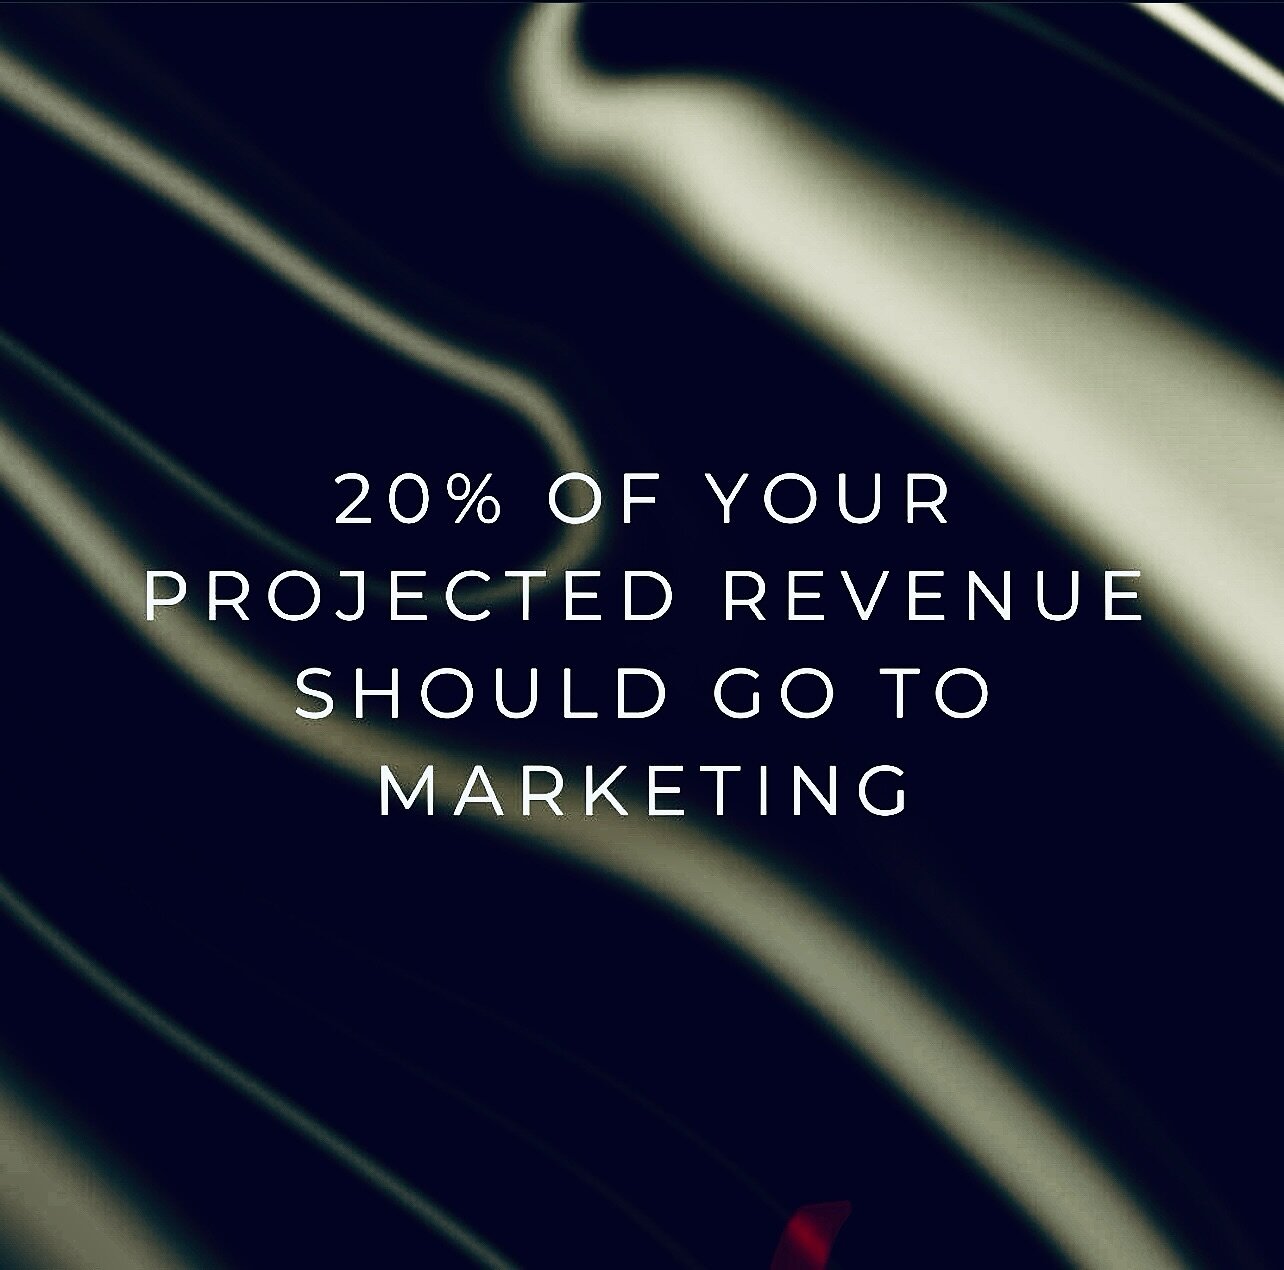 Hey there, fantastic folks! Well, there, I said it!
🧊Allocate 20% of your projected revenue for that marketing magic.

Whether it&rsquo;s jazzing up your website, brand refreshes, partnerships &amp; sponsorships, rocking outdoor ads, or sharing your